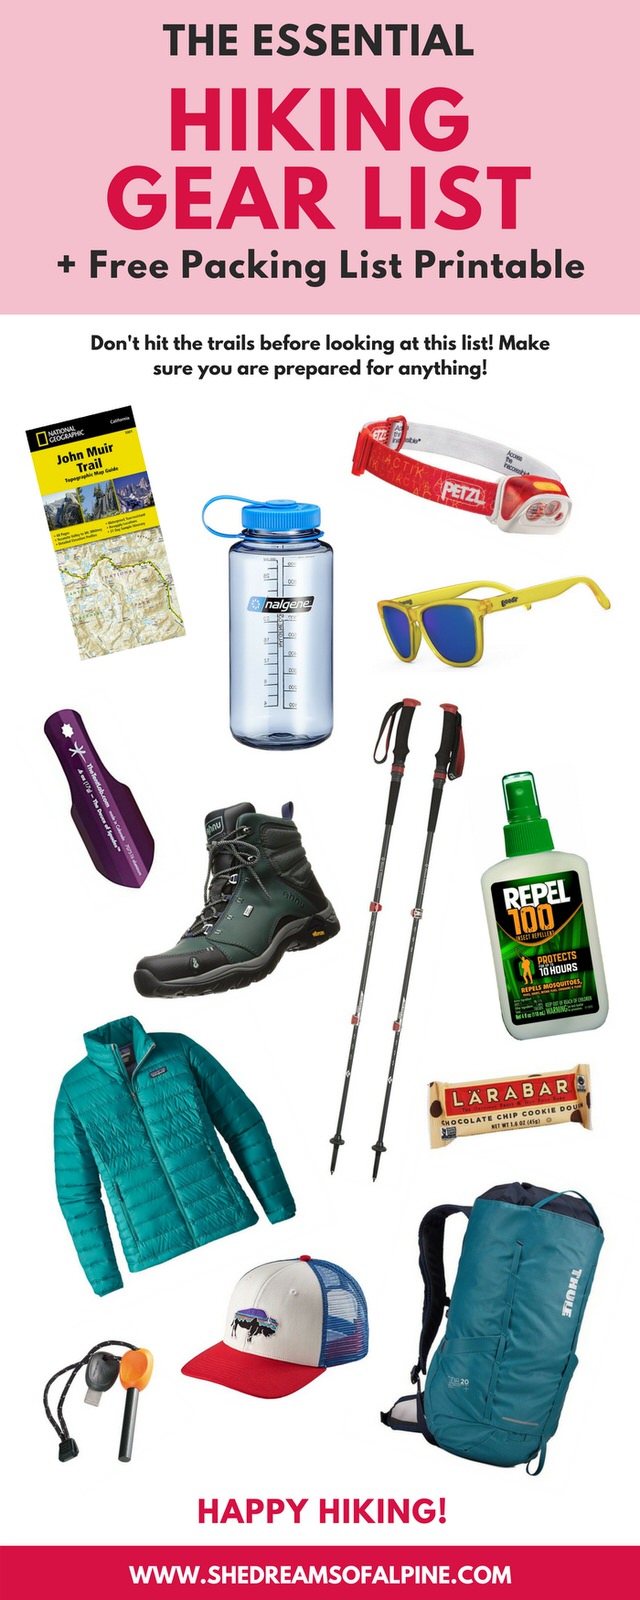 The Essential Hiking Gear List for 2019 (PLUS Hiking Packing List Printable)